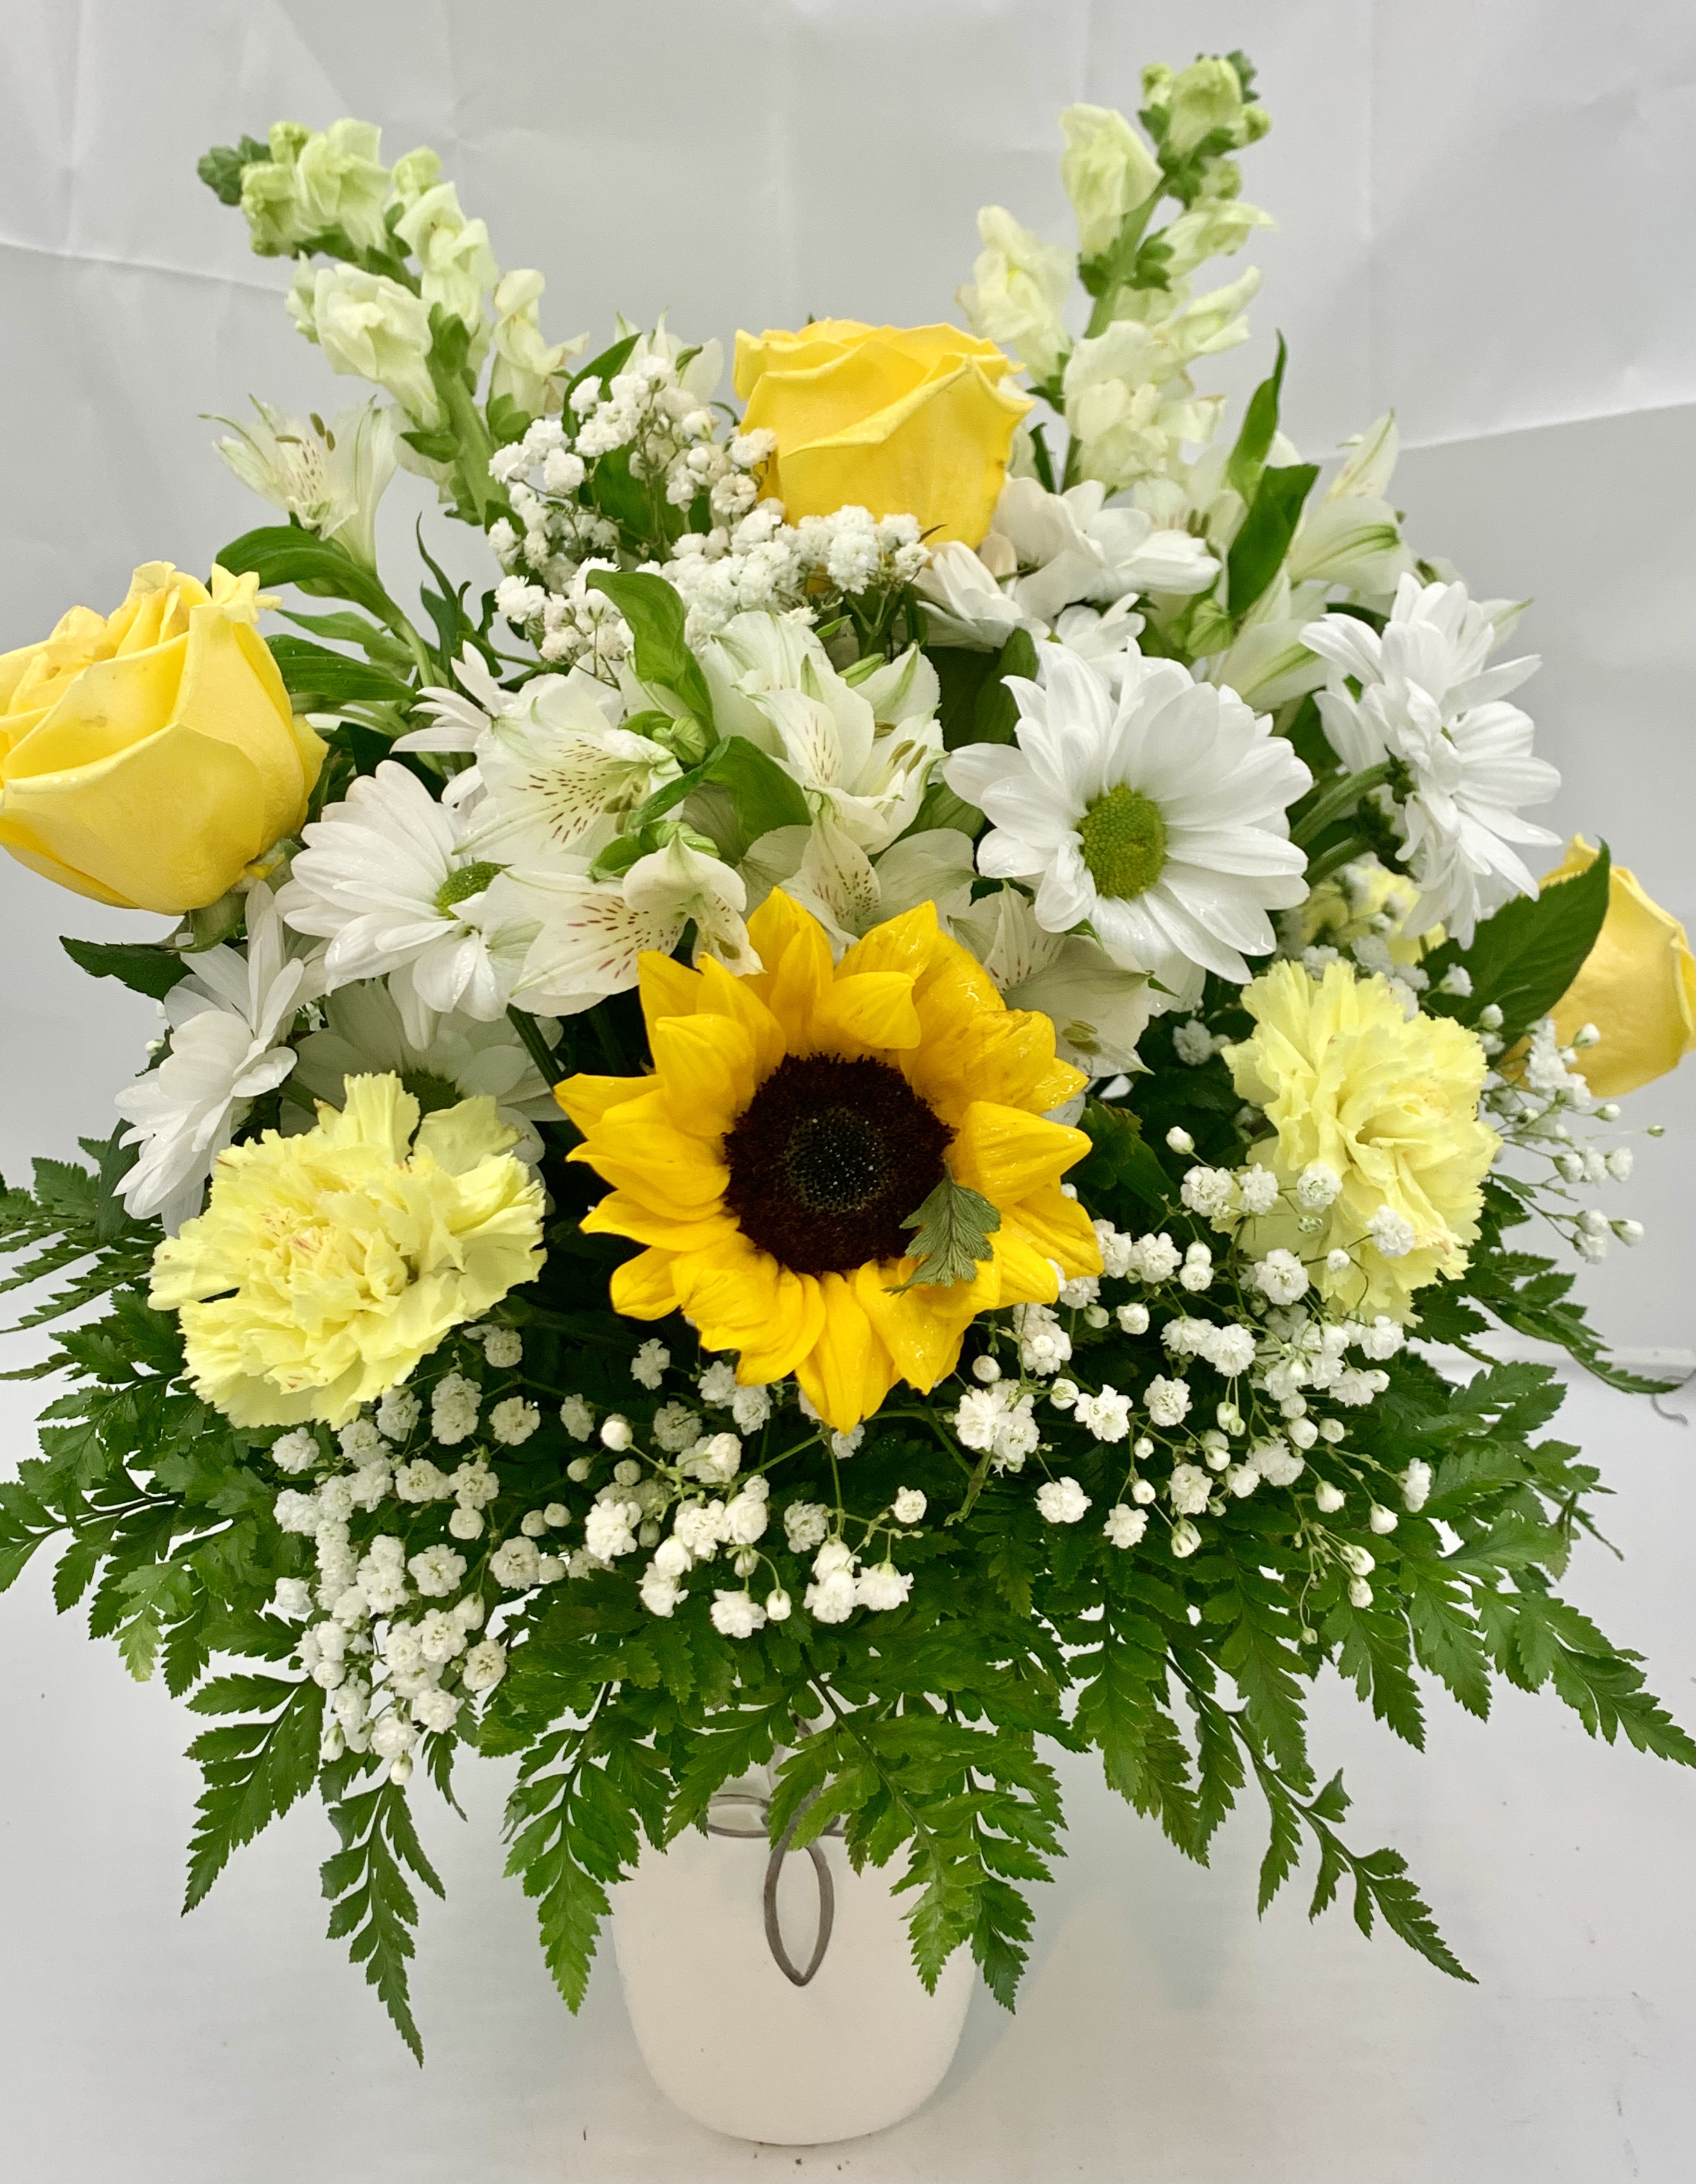 Yellow roses and sunflowers